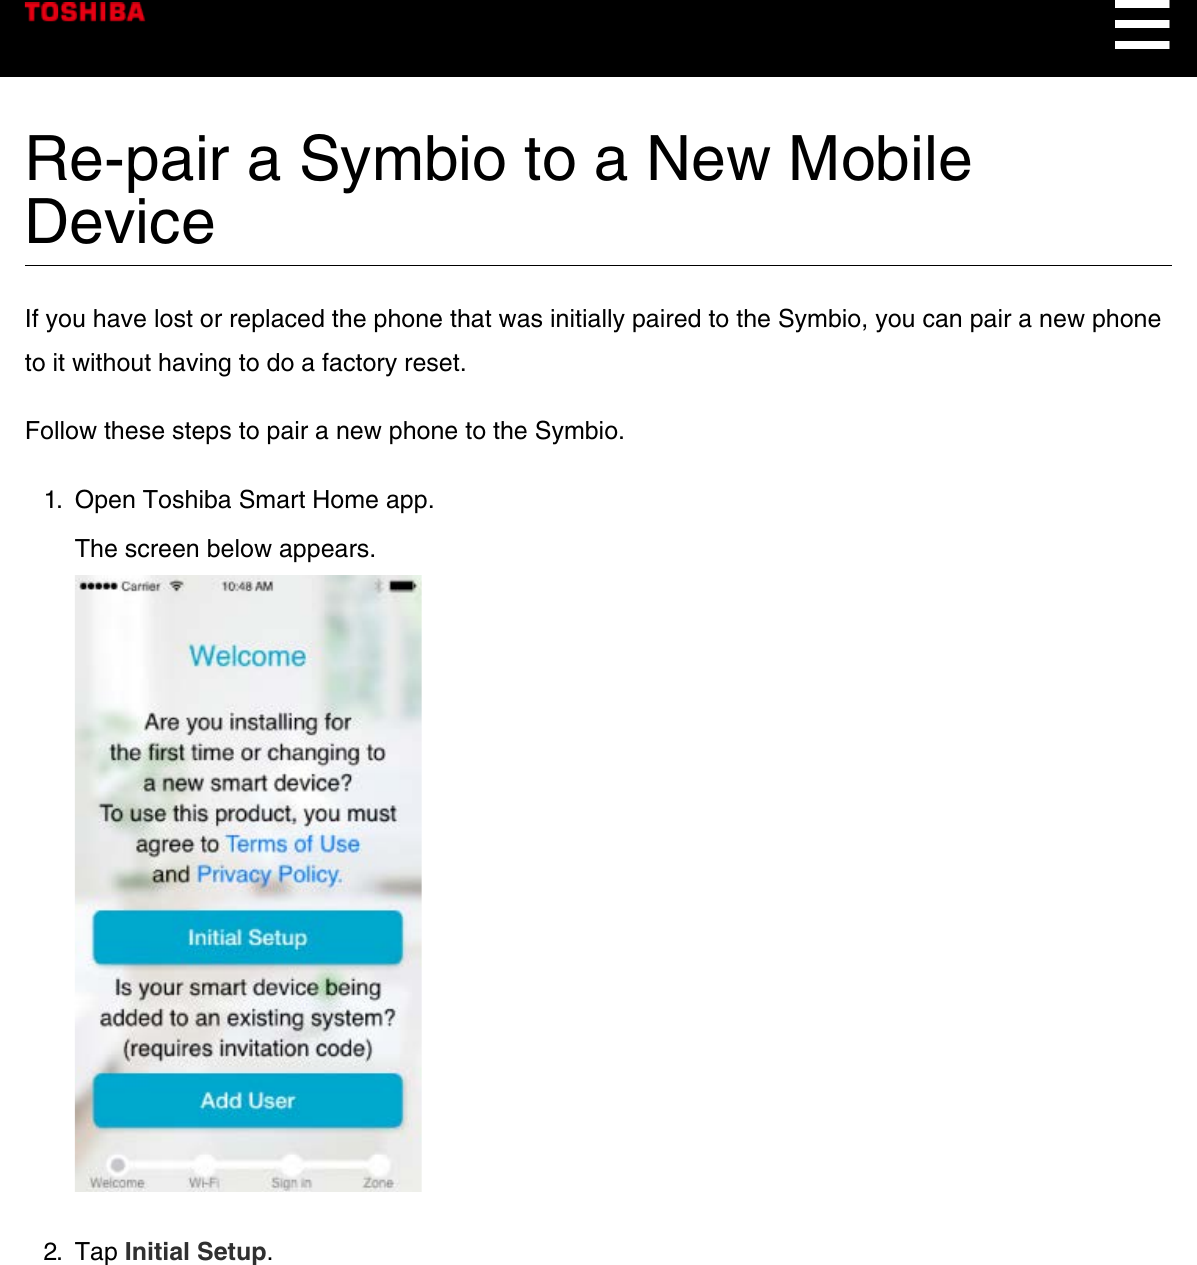 Re-pair a Symbio to a New MobileDeviceIf you have lost or replaced the phone that was initially paired to the Symbio, you can pair a new phoneto it without having to do a factory reset.Follow these steps to pair a new phone to the Symbio.1.  Open Toshiba Smart Home app.The screen below appears.2.  Tap Initial Setup.